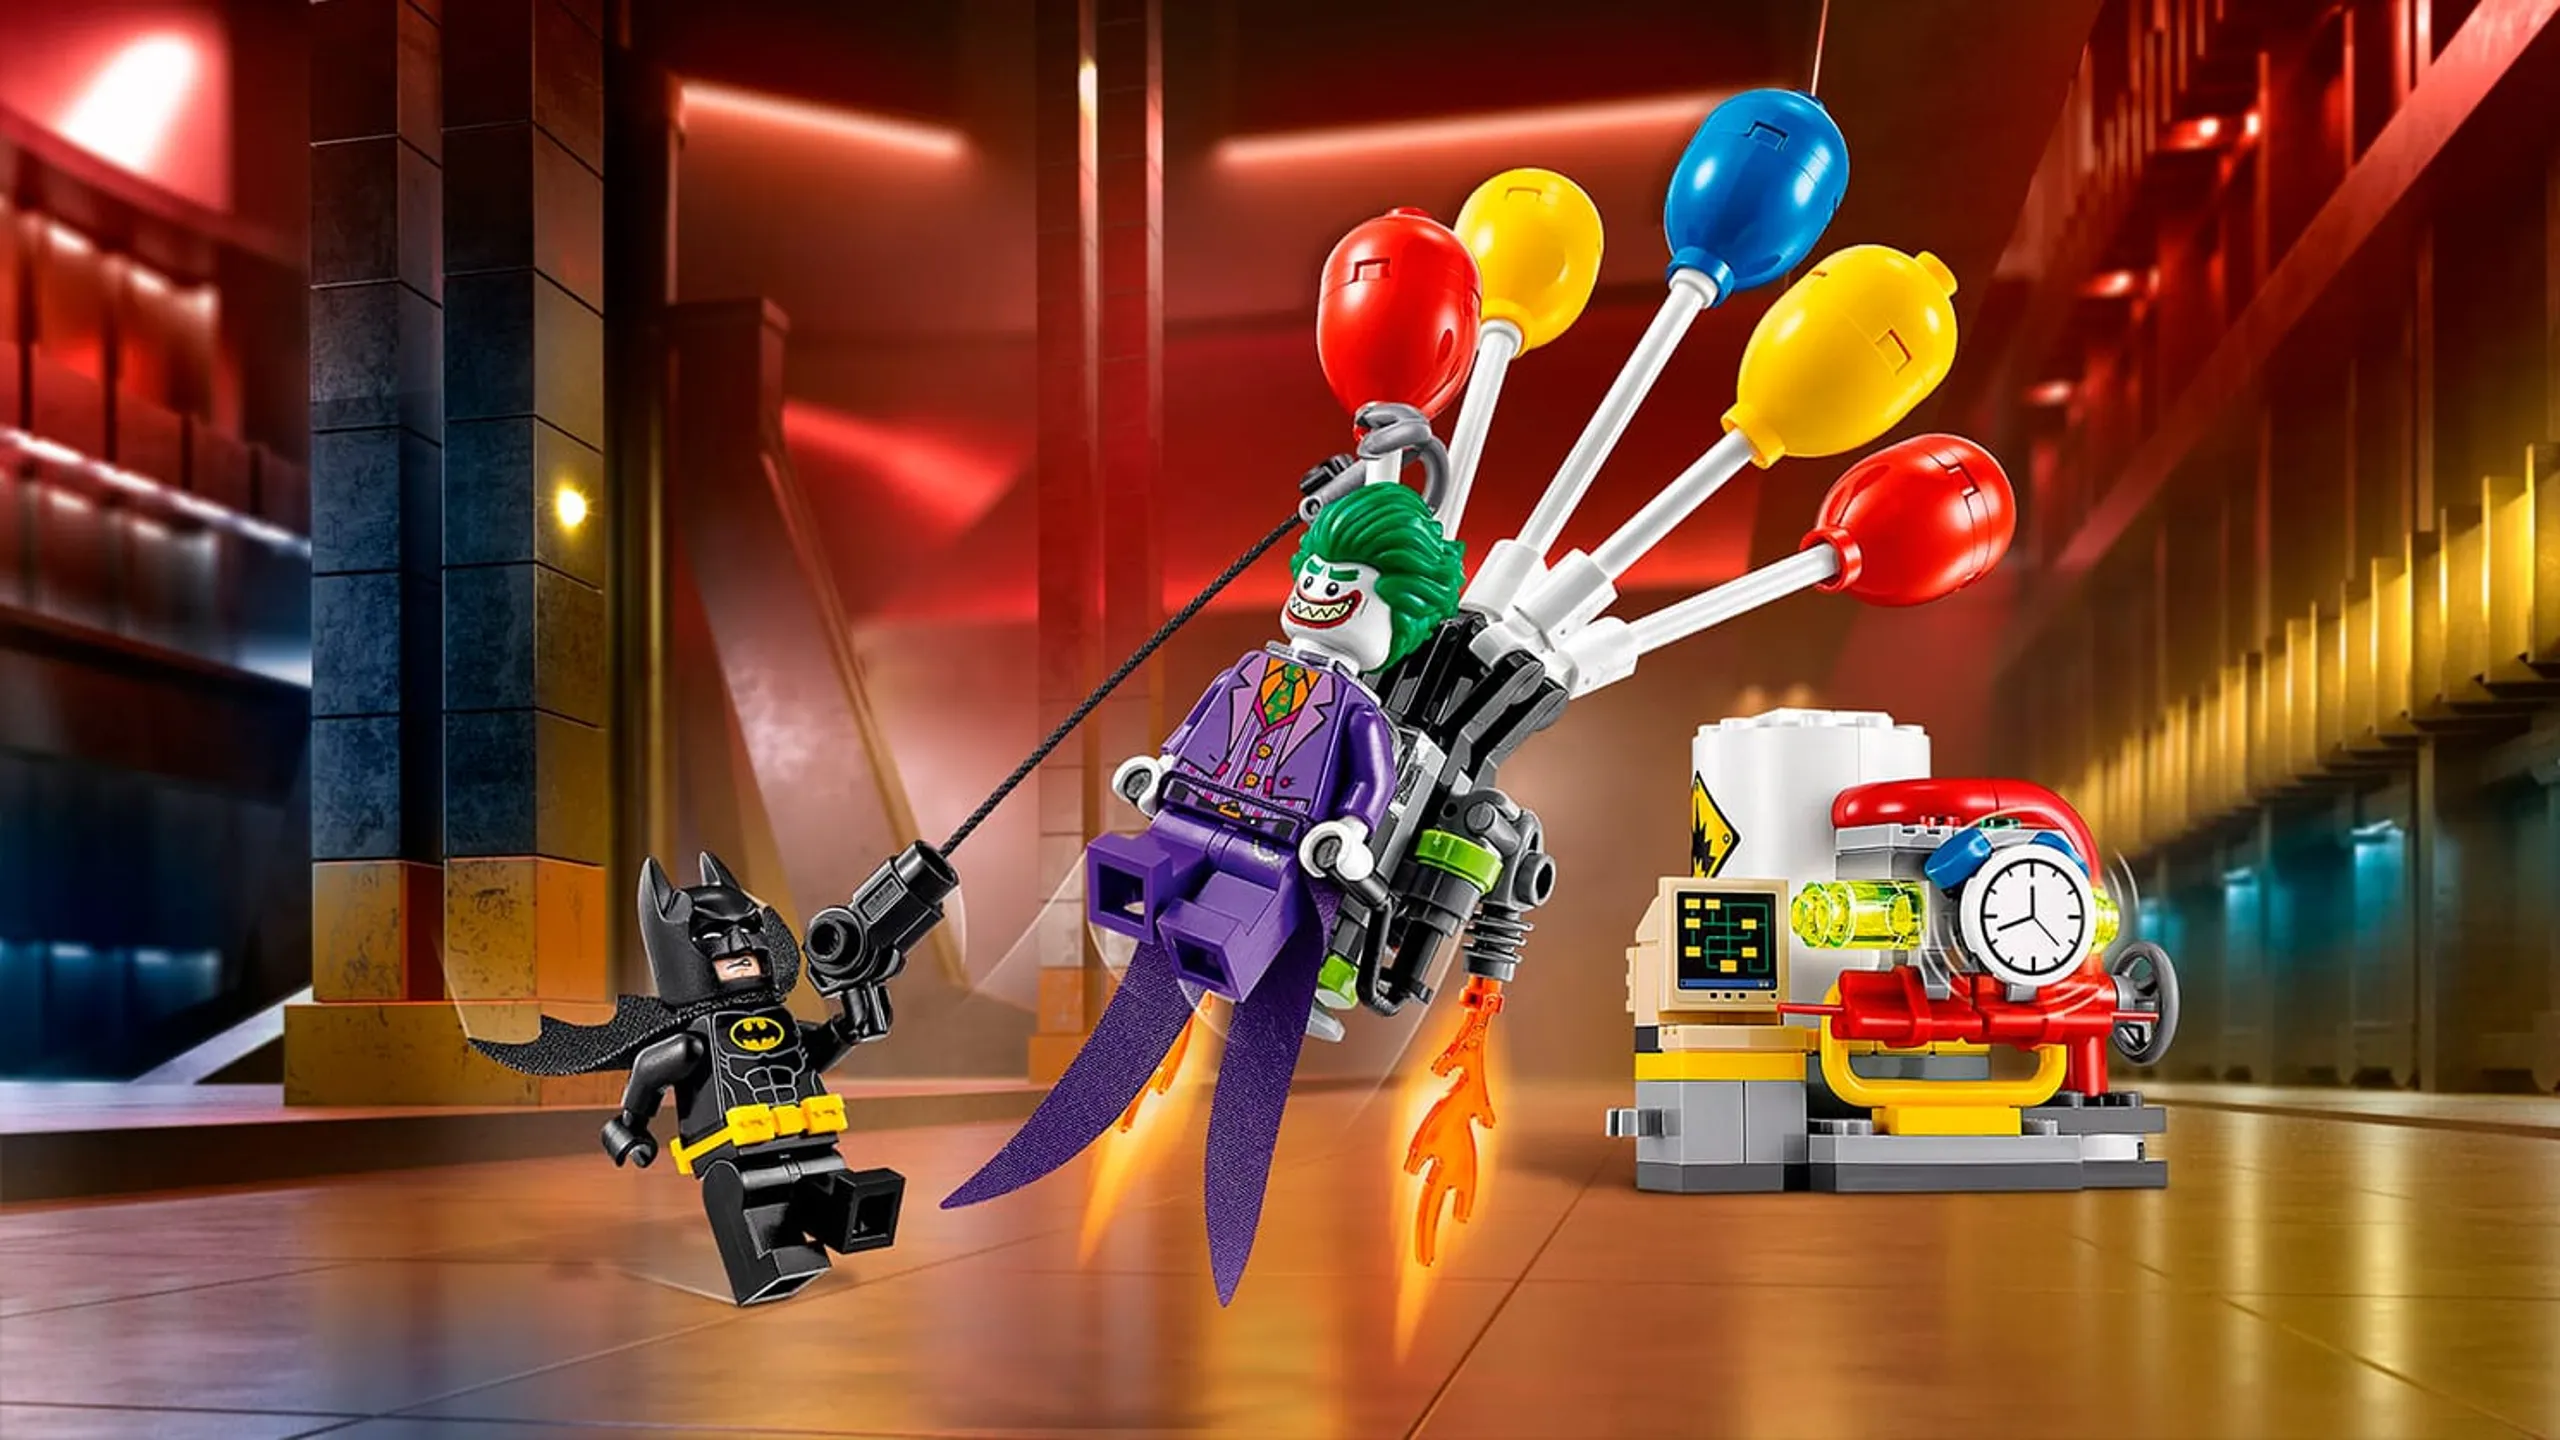 LEGO Batman Movie Joker Balloon Escape - 70900 – the Joker tries to escape from Batman with a jetpack and balloons